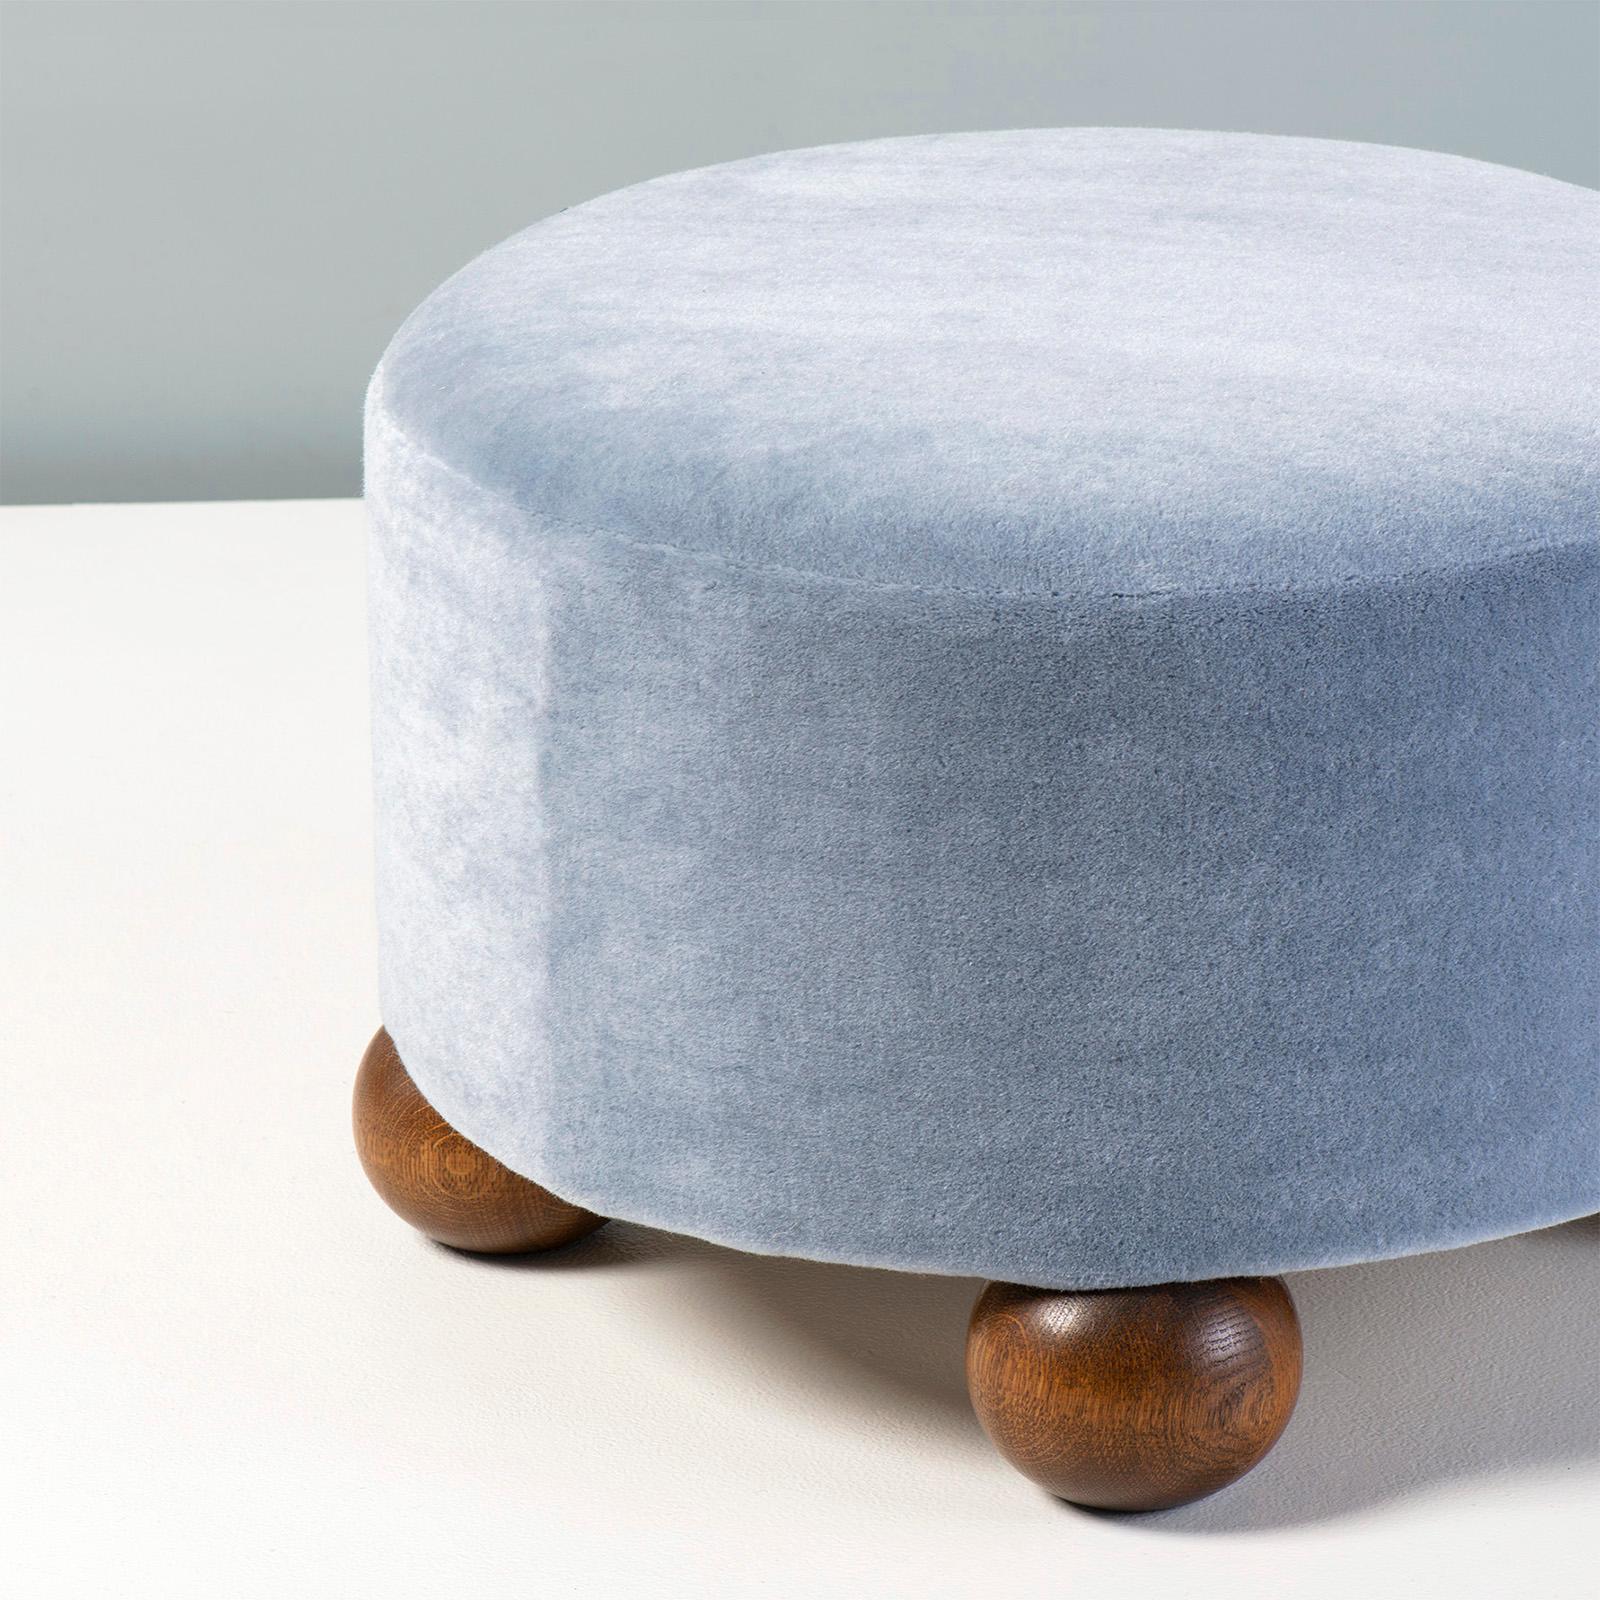 Dagmar - Luupo Round Ottoman

Custom-made ottoman developed & produced at our workshops in London using the highest quality materials. This example is upholstered in a sky blue mohair velvet by Pierre Frey with fumed oak ball feet. This ottoman is